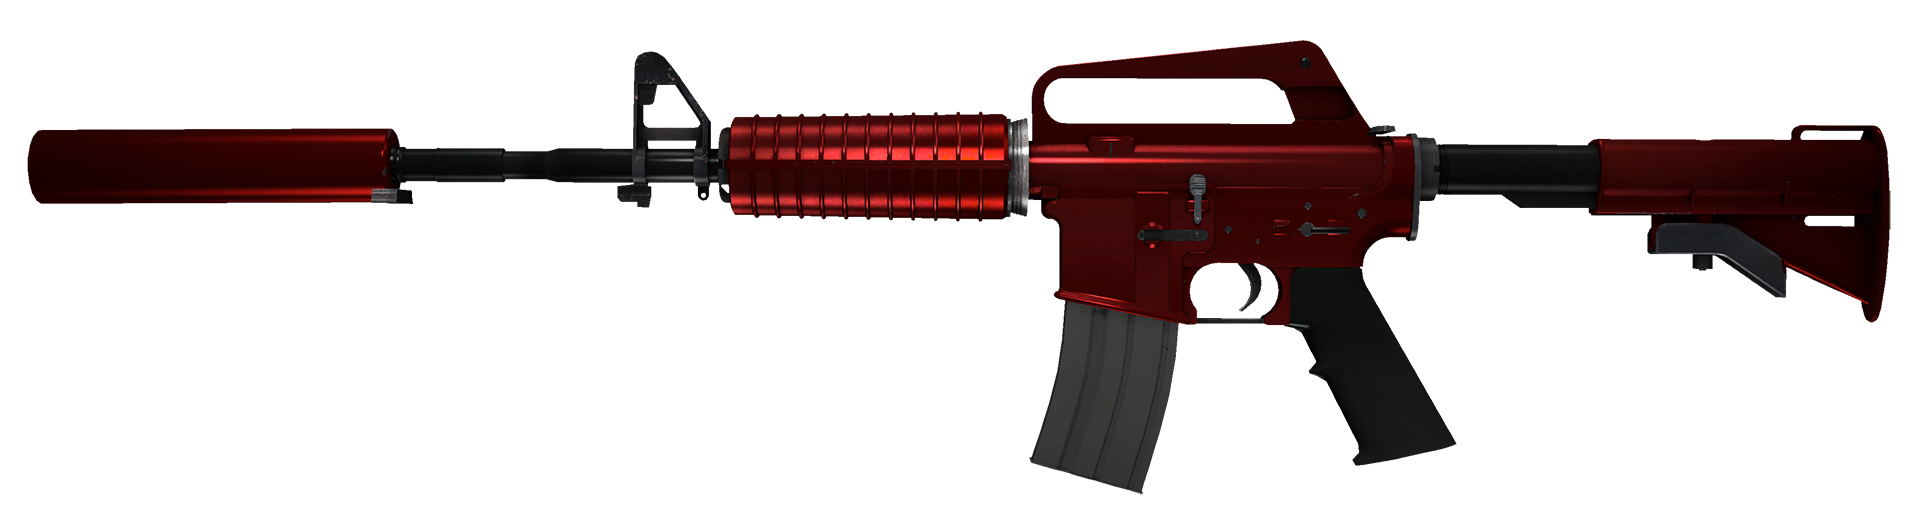 M4A1-S Hot Rod Large Rendering